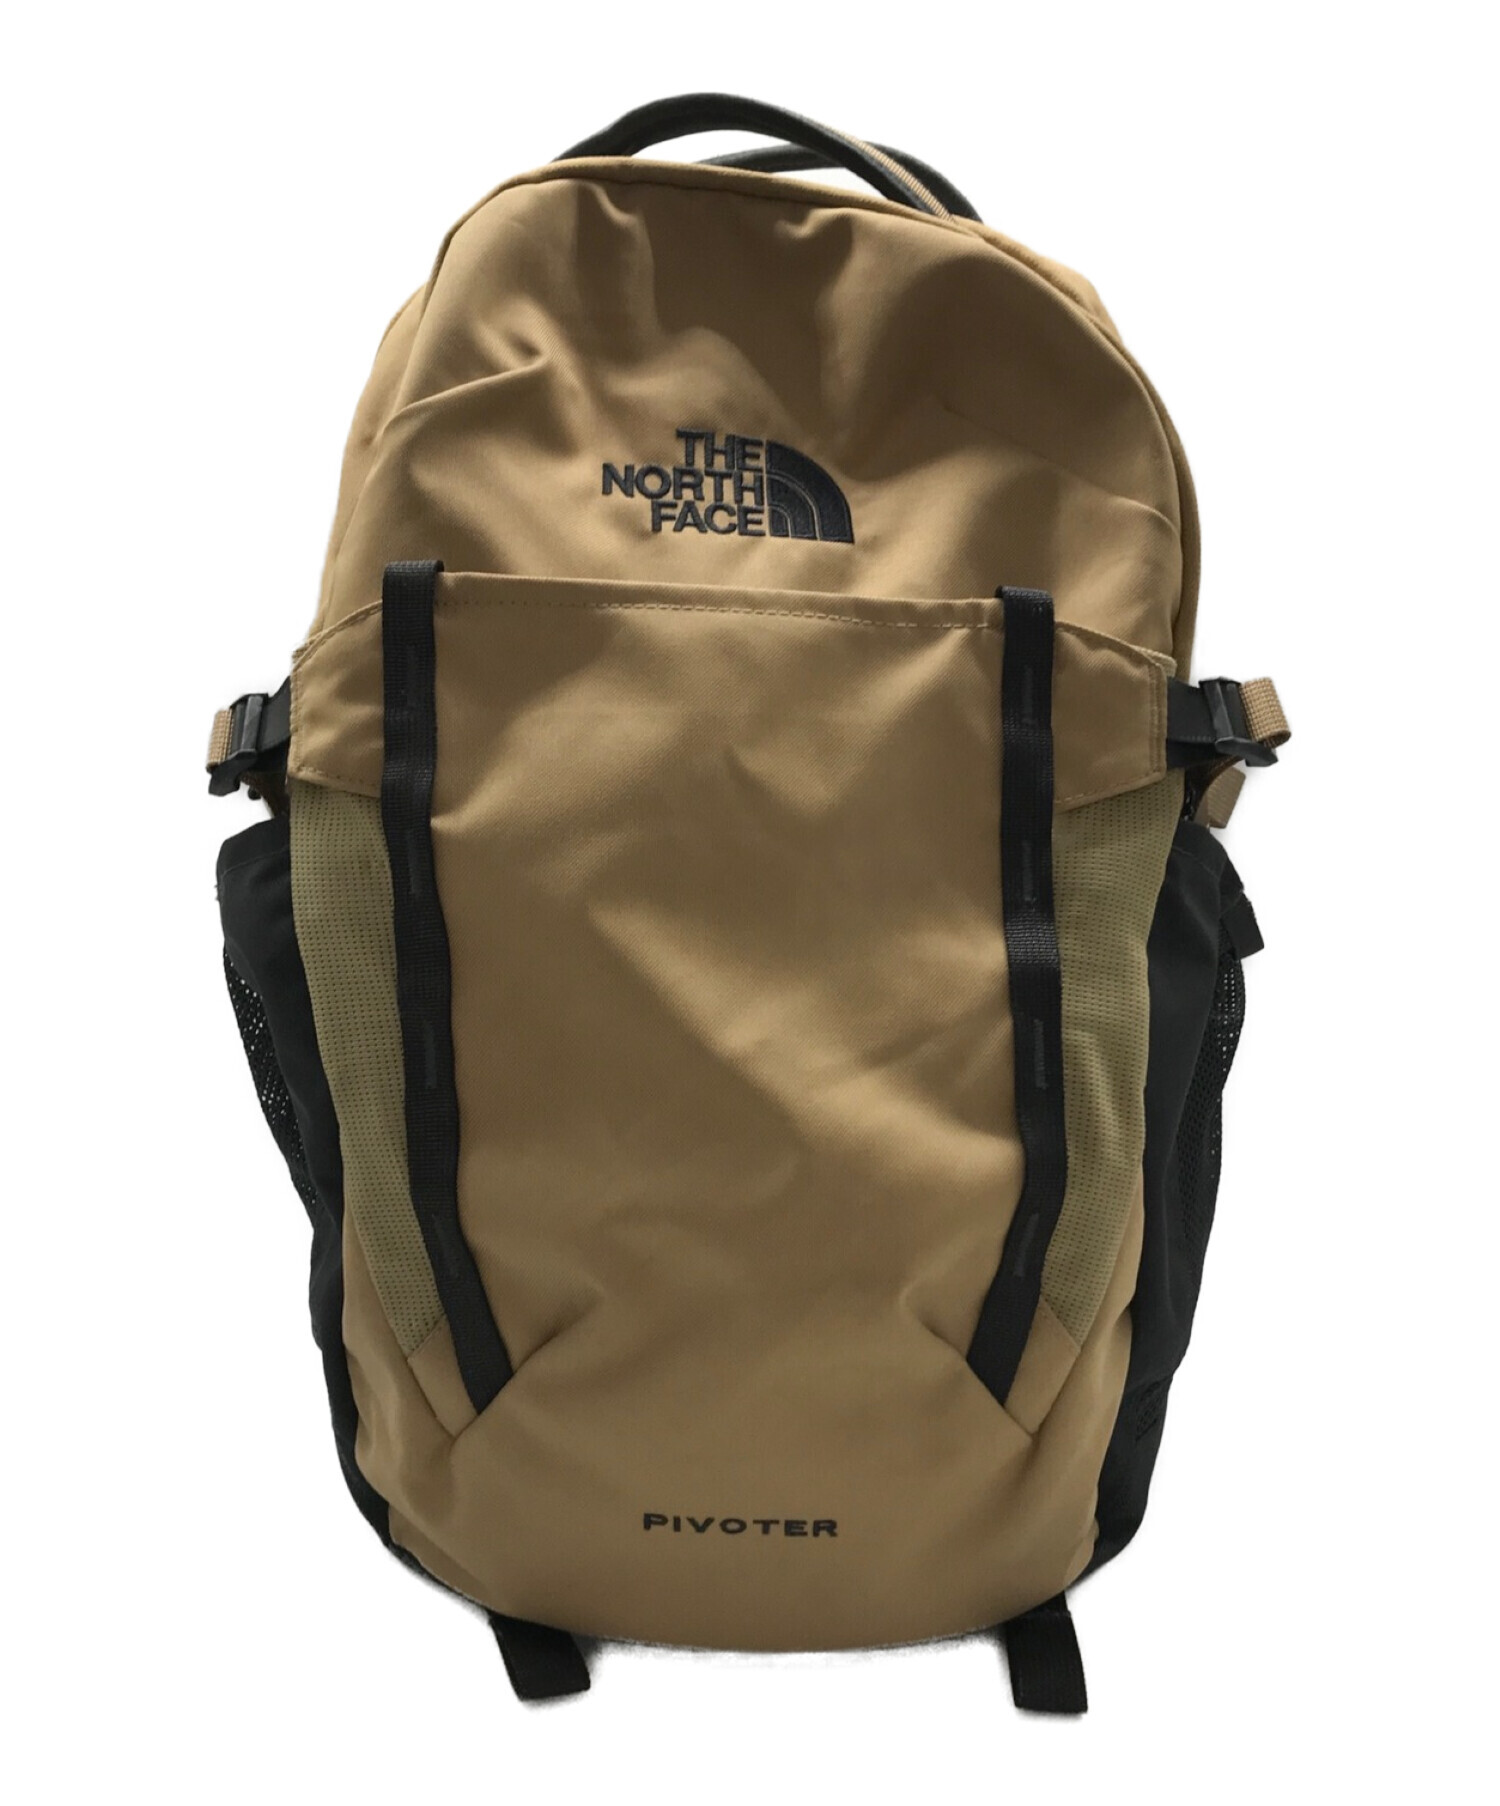 The North Face PIVOTER リュック